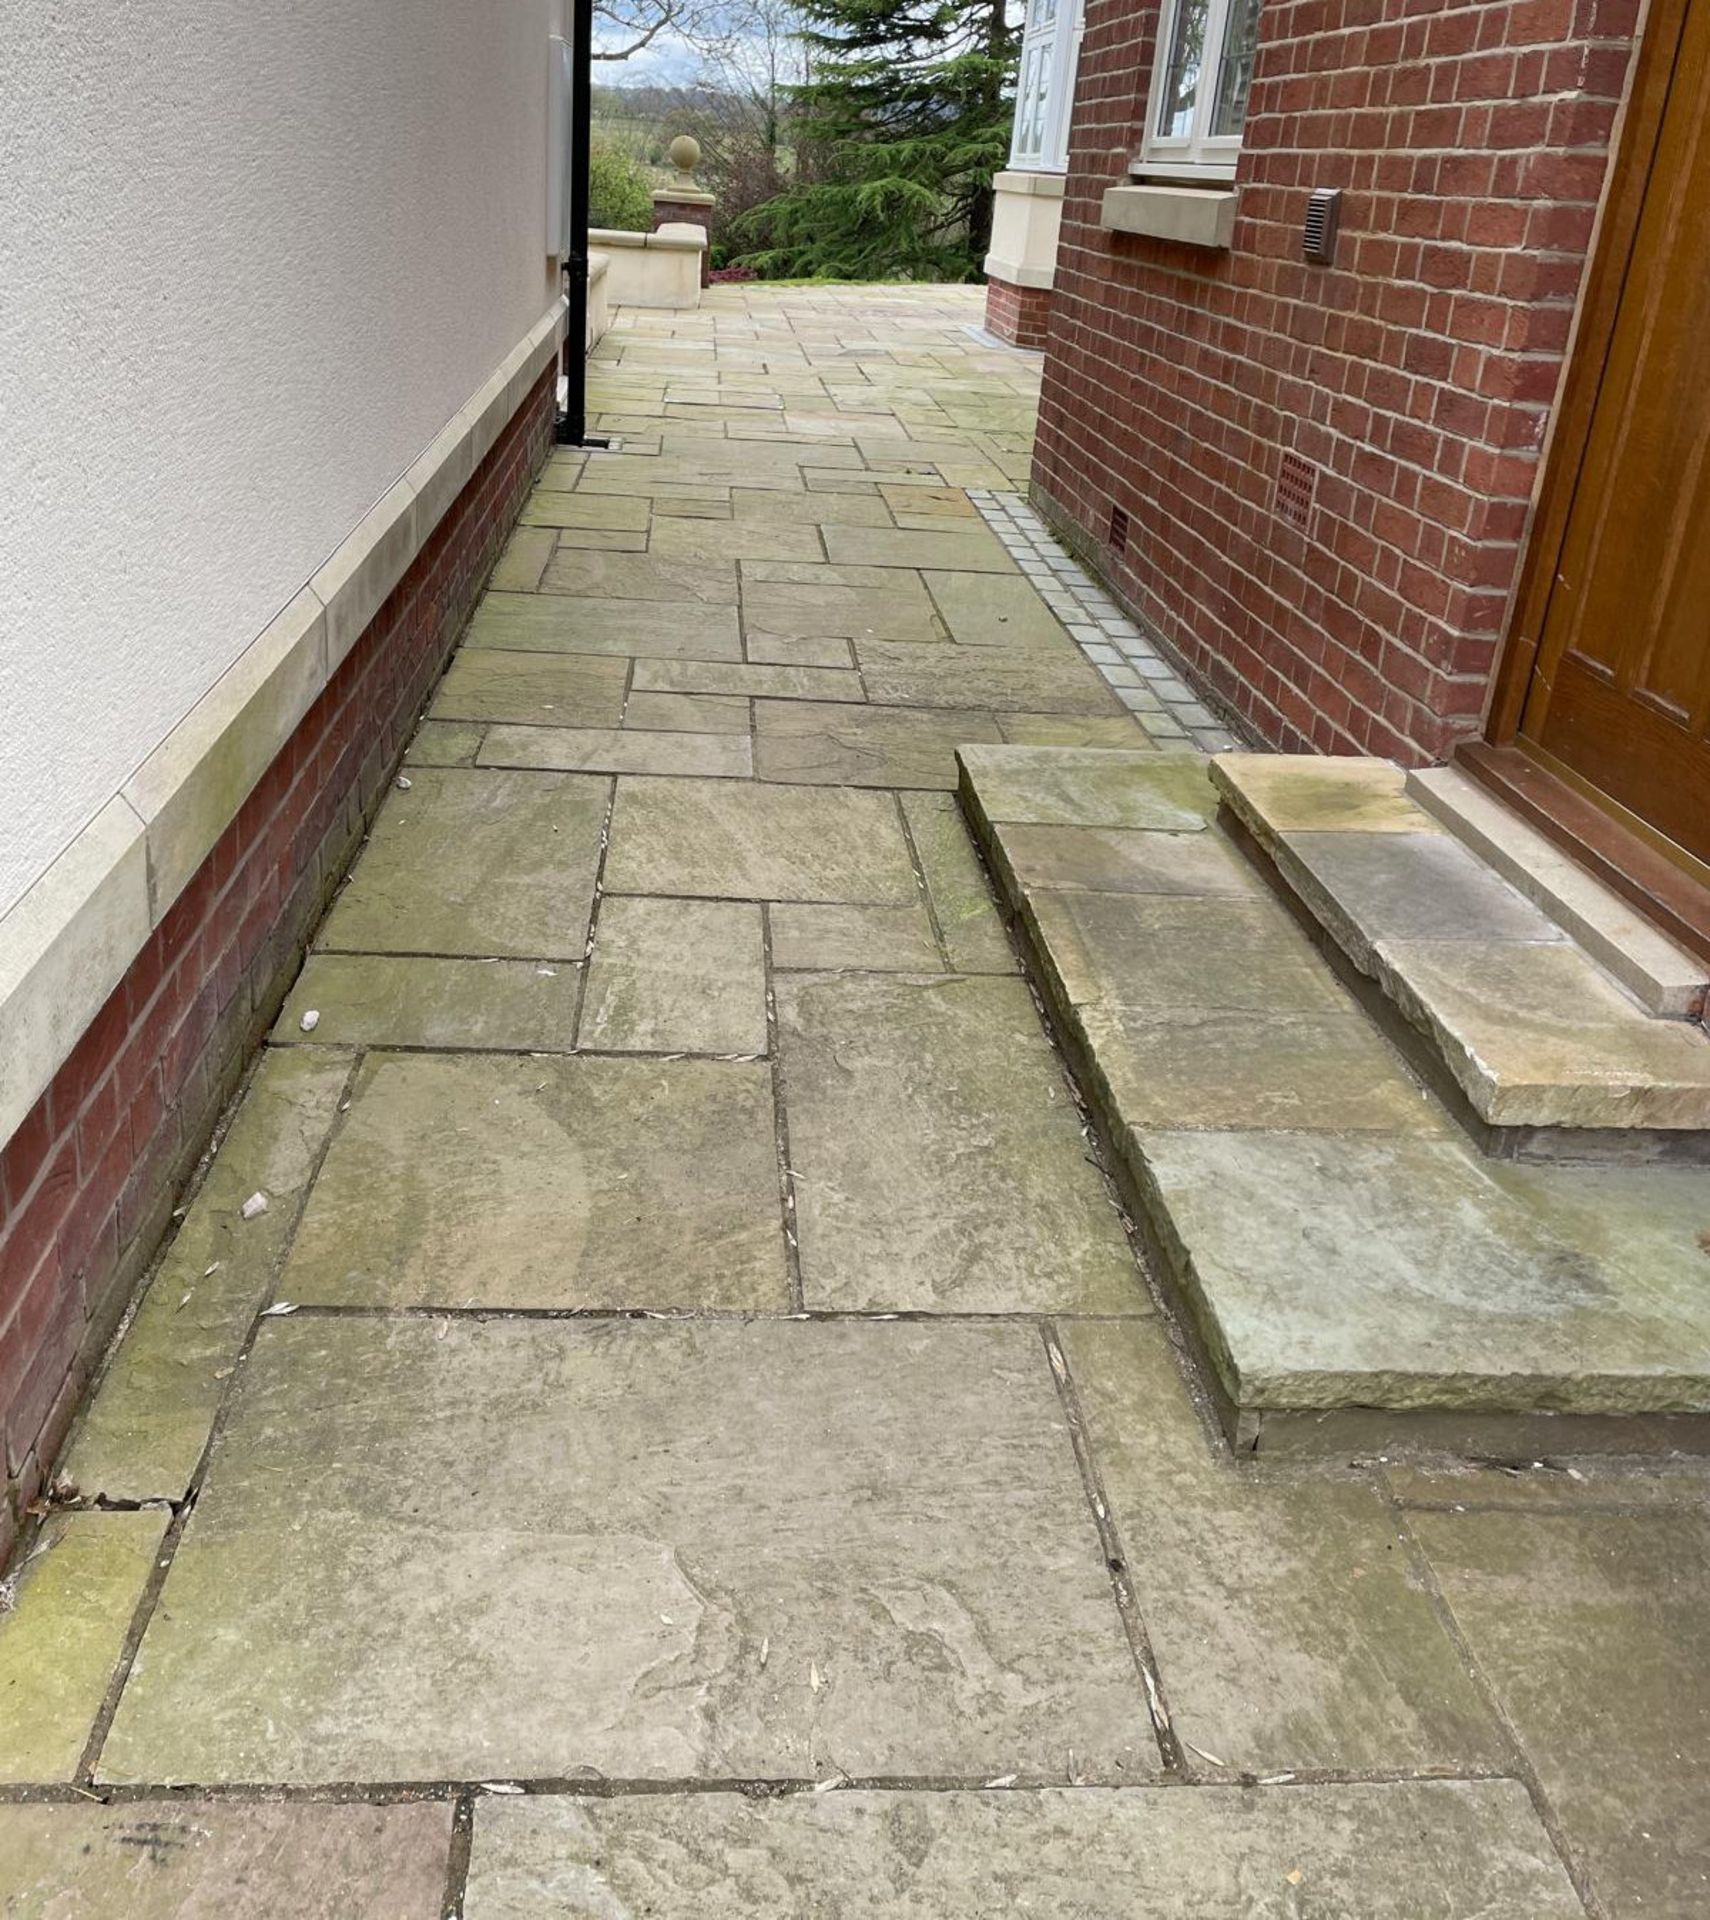 Large Quantity of Yorkstone Paving - Over 340sqm - CL896 - NO VAT ON THE HAMMER - Location: Wilmslow - Image 56 of 57